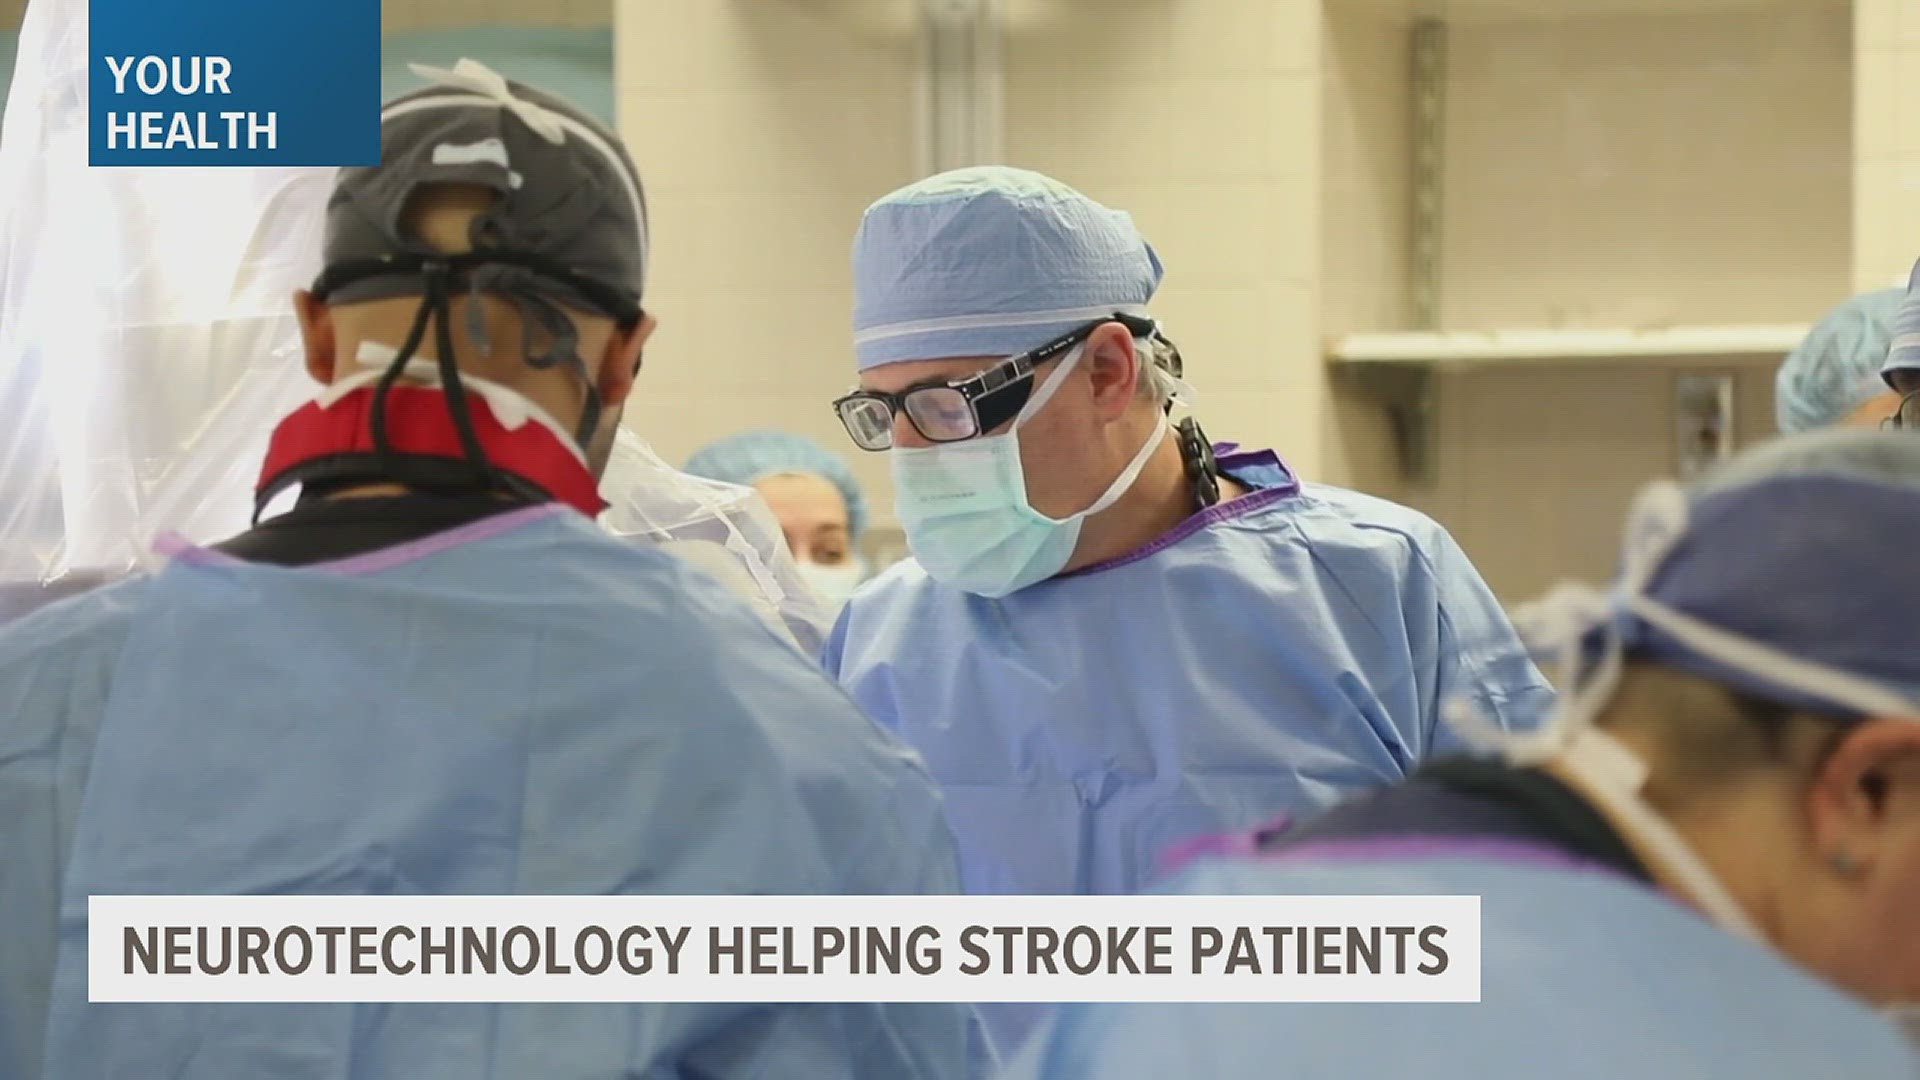 Technology used on patients experiencing extreme pain is being tested to help individuals regain mobility in paralyzed limbs.